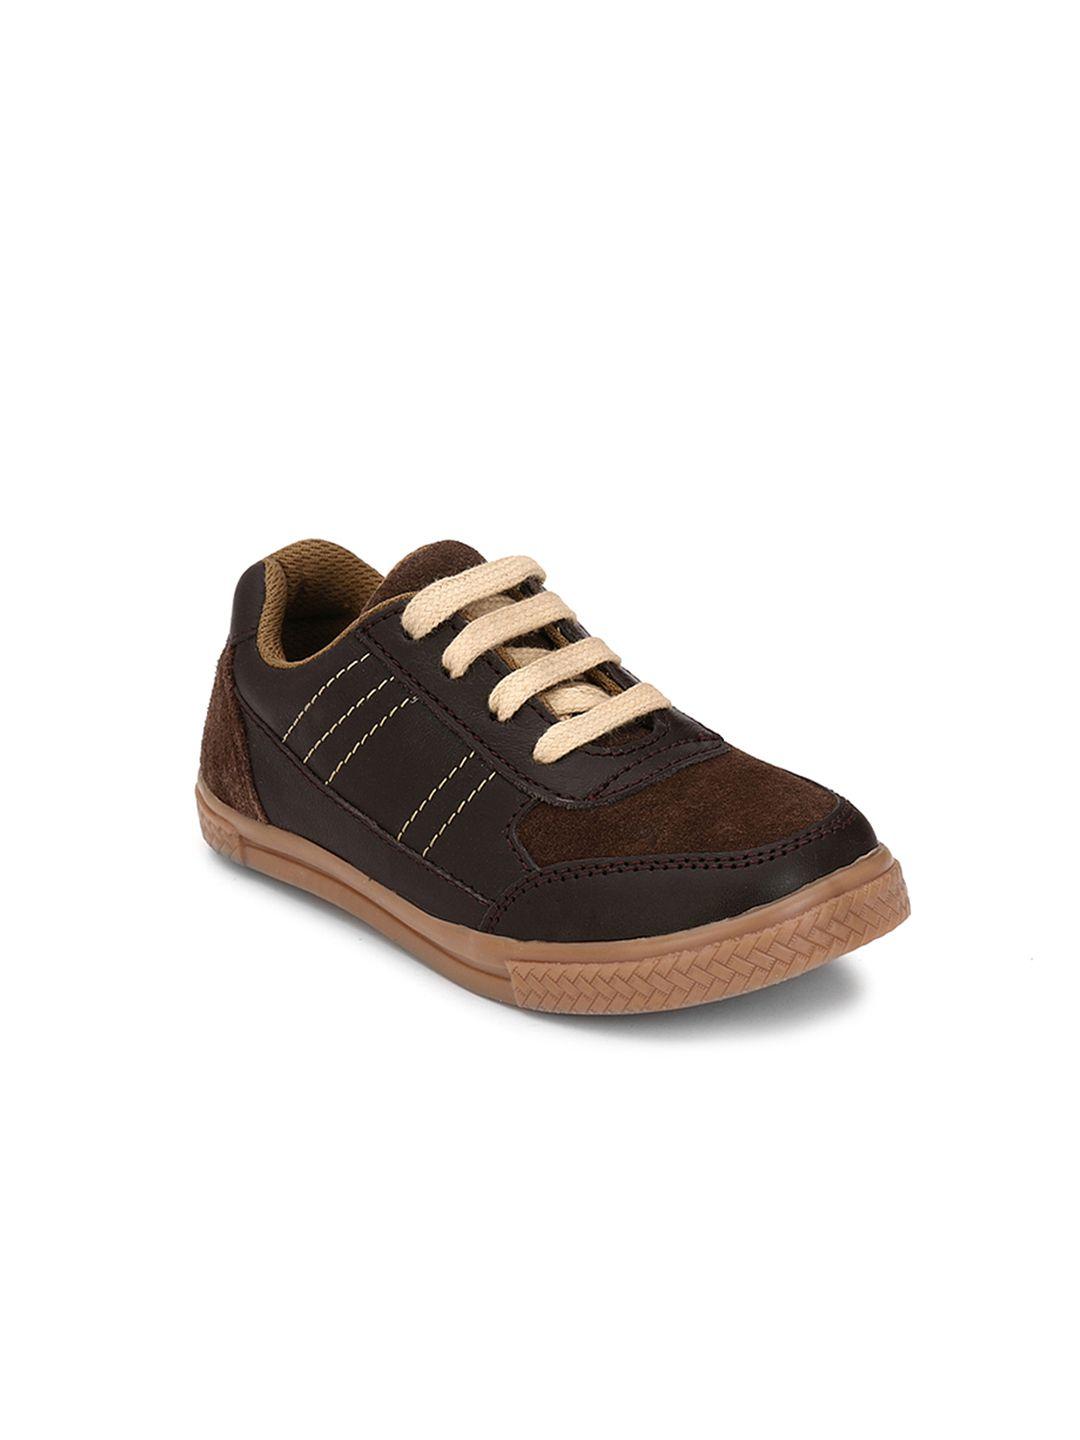 tuskey boys brown leather sneakers